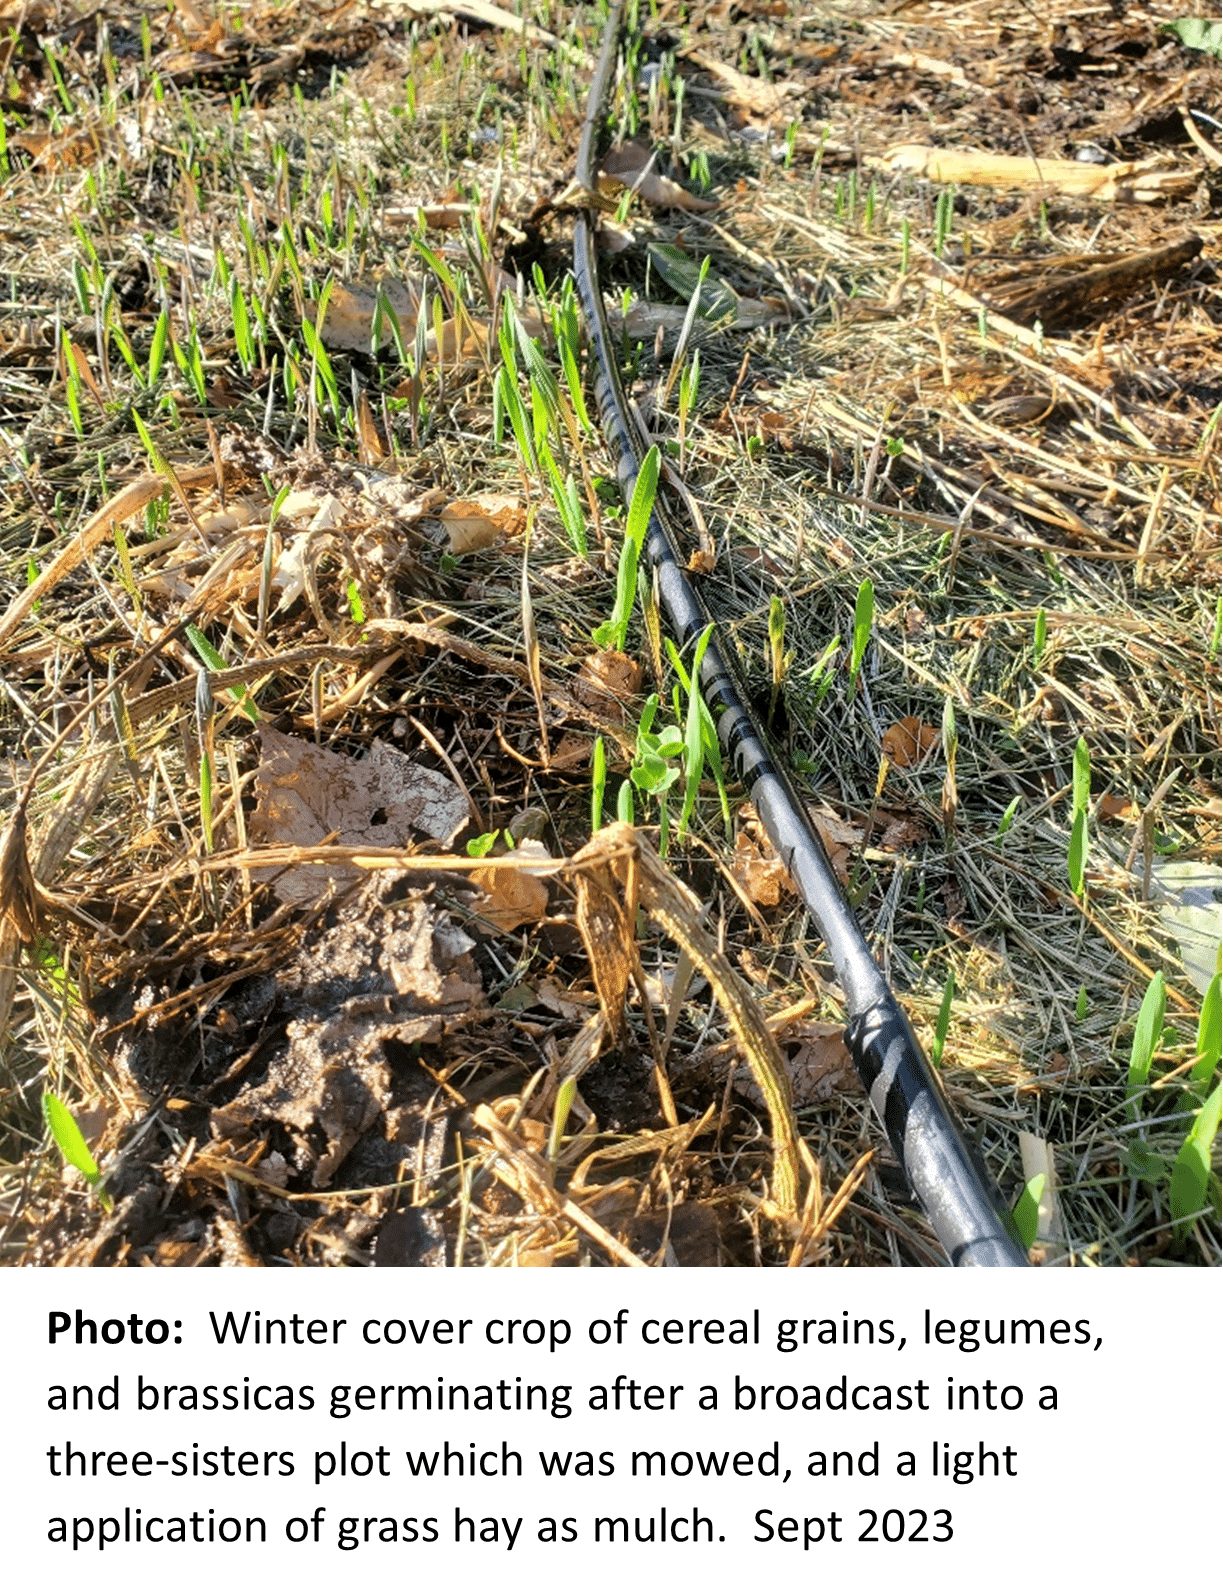 Winter cover crop of cereal grains, legumes, and brassicas germinating after a broadcast into a three-sisters plot which was mowed, and a light application of grass hay as mulch. Sept 2023